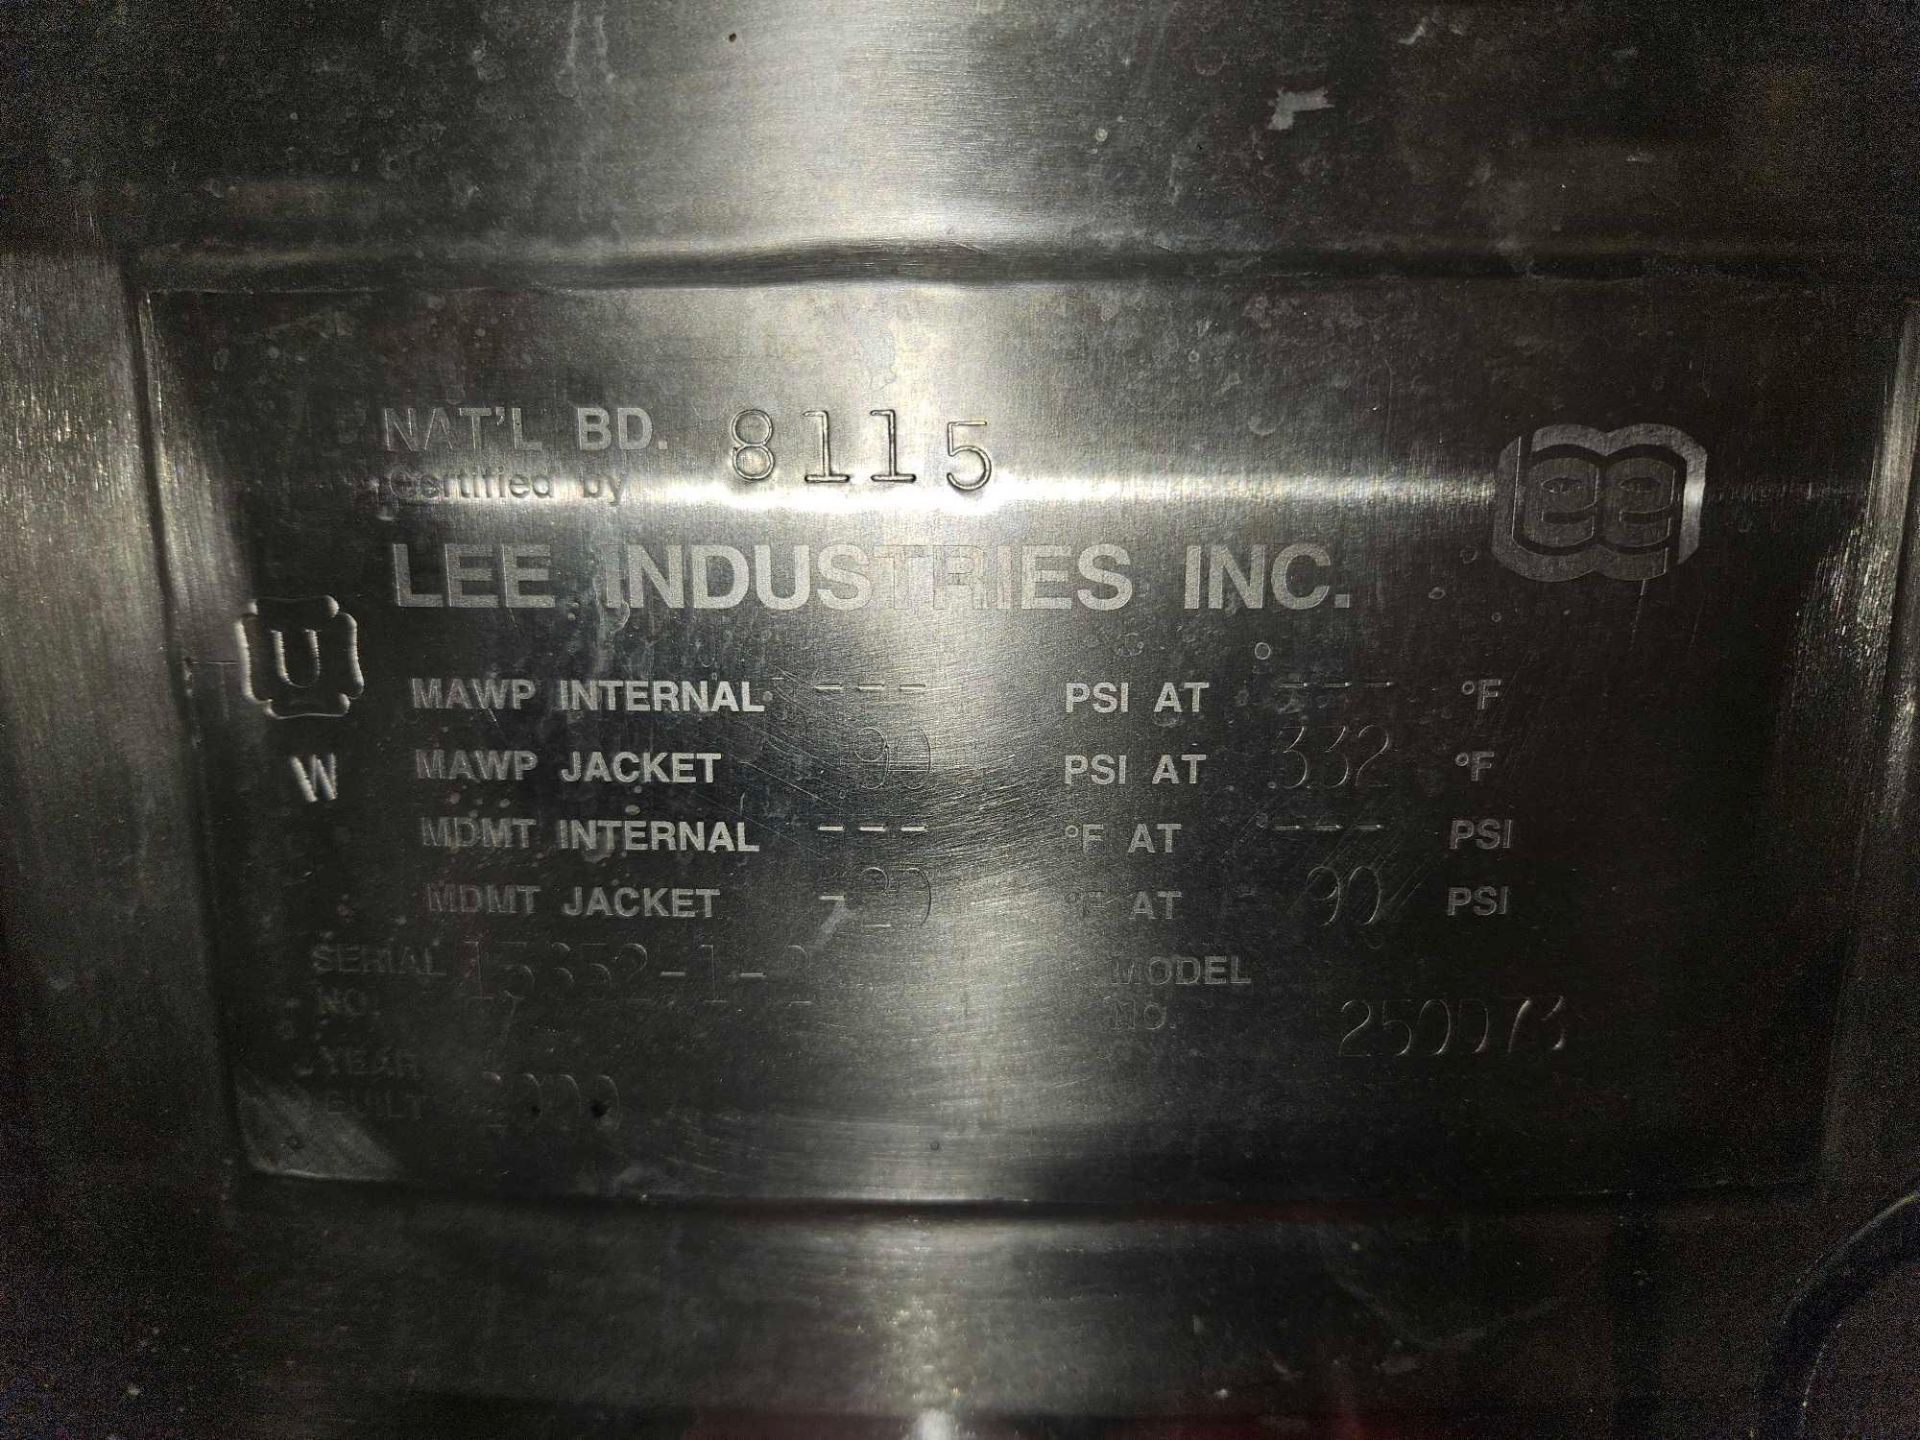 Lee Industries 250 Gallon Stainless Steel Triple Agitated Mixing Kettle - Image 14 of 25